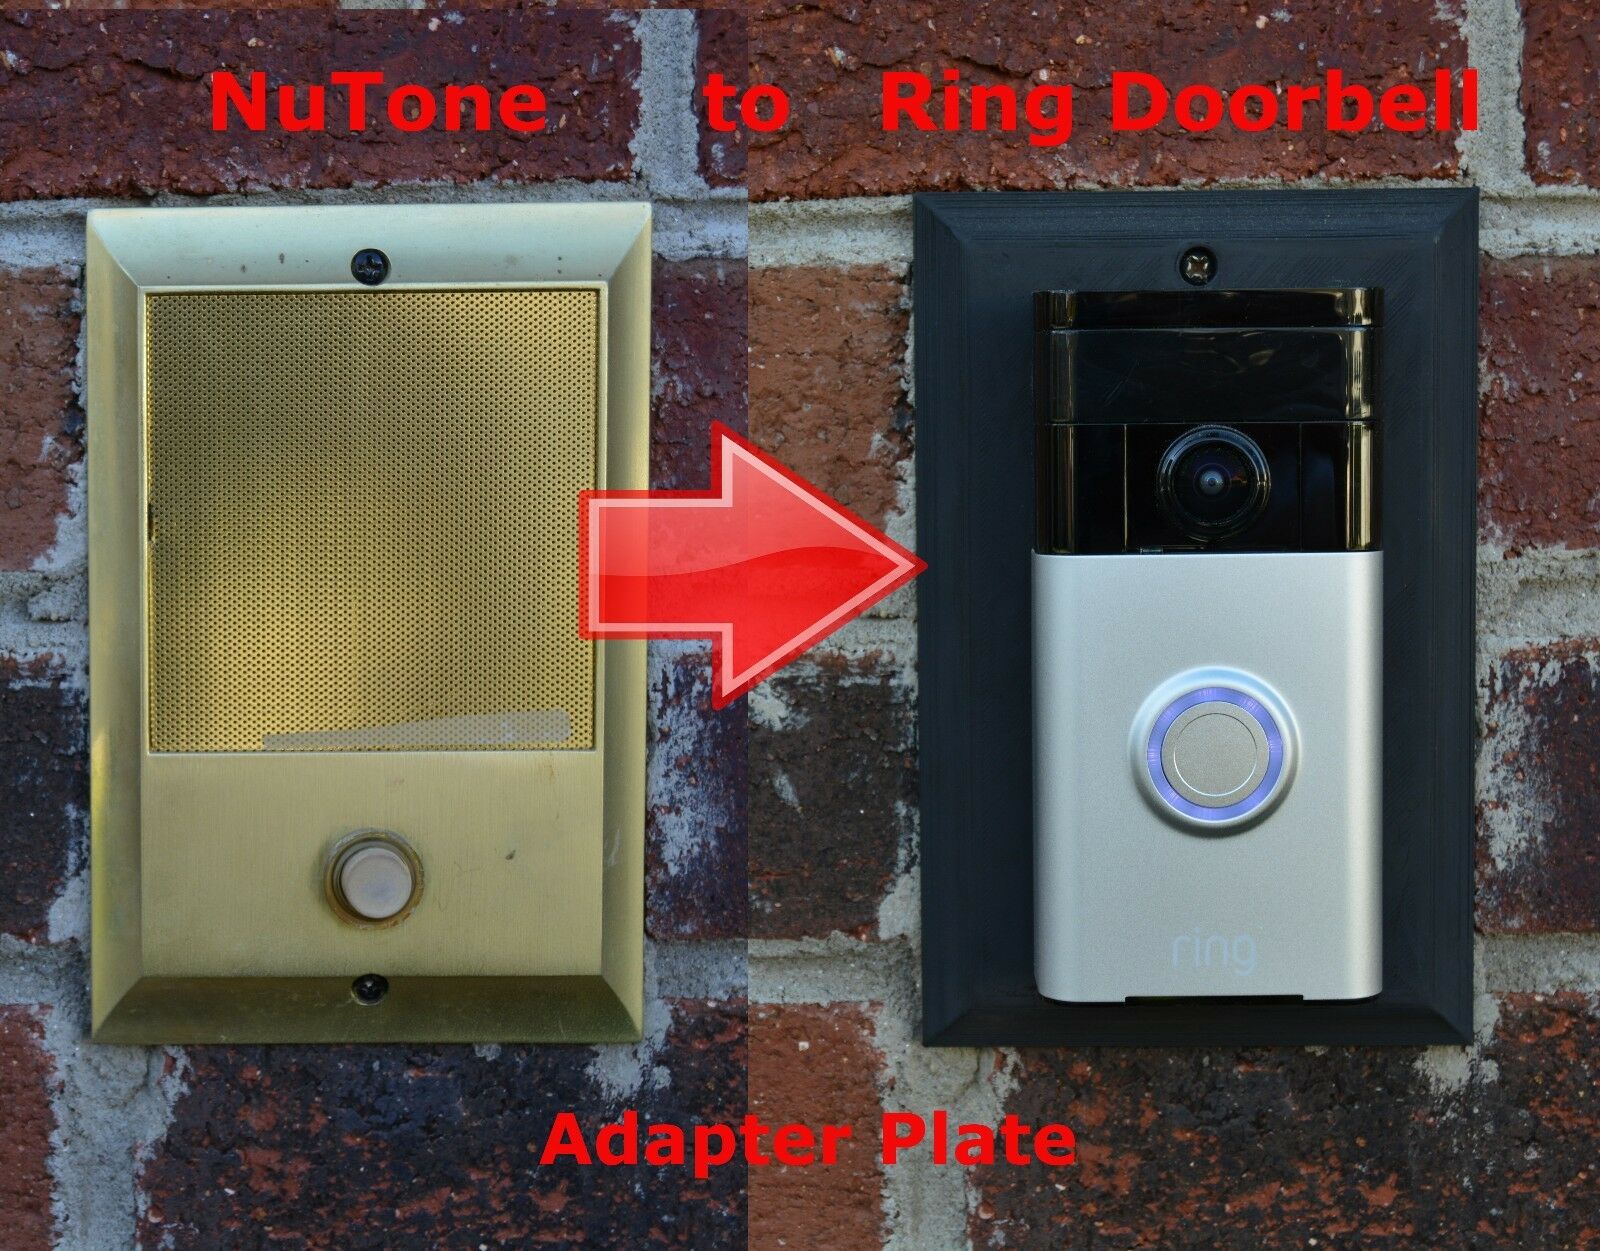 Ring Doorbell Adapter Plate Nutone And M&s Intercom Systems Stainless Steel